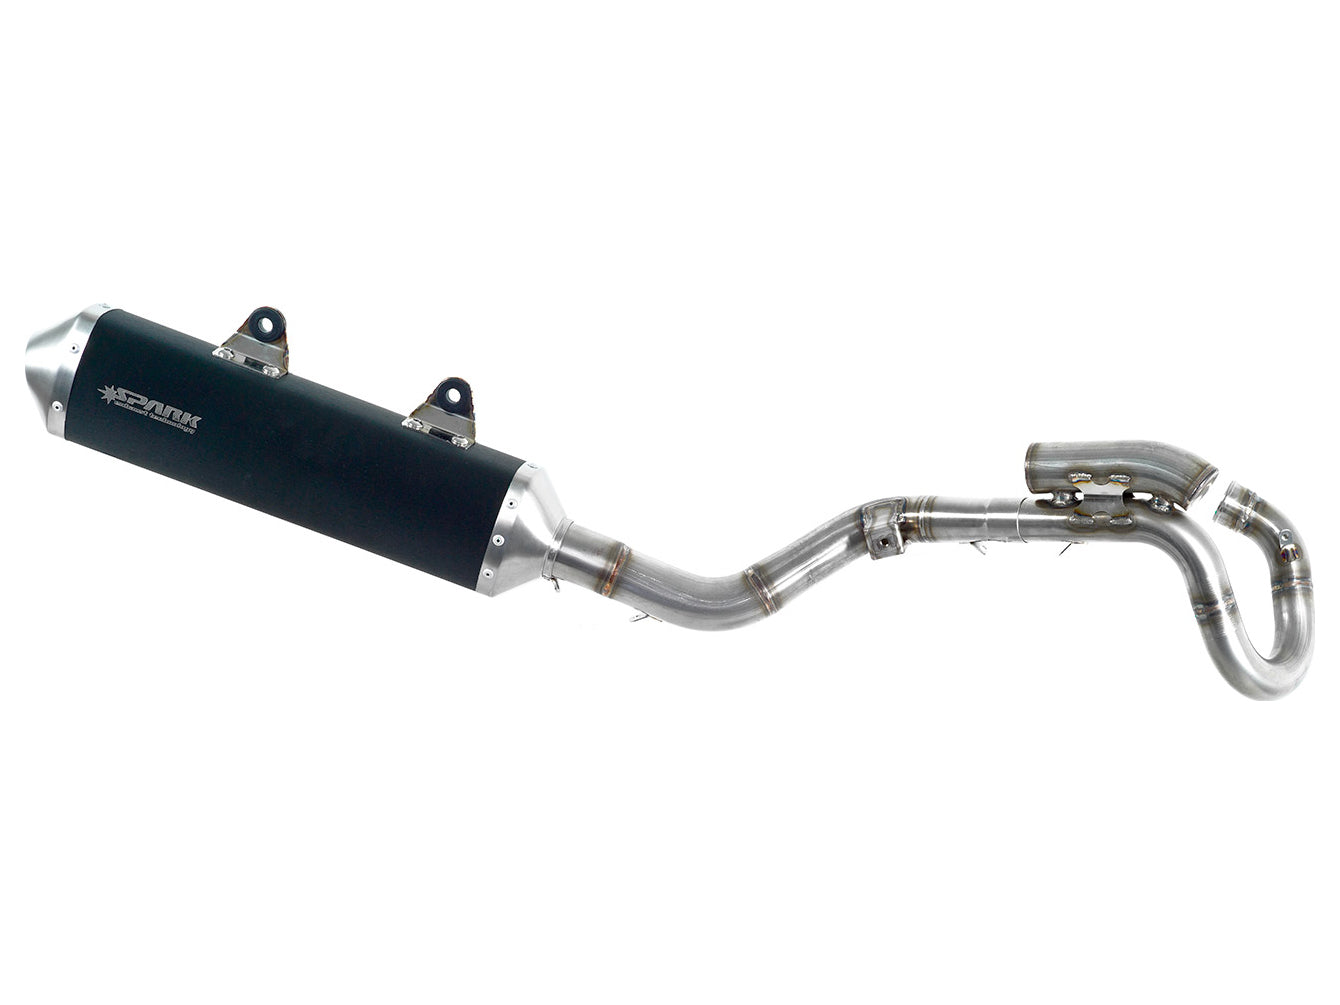 SPARK GKT8002 KTM SX-F 350 (11/12) Full Exhaust System "Off Road" (racing)